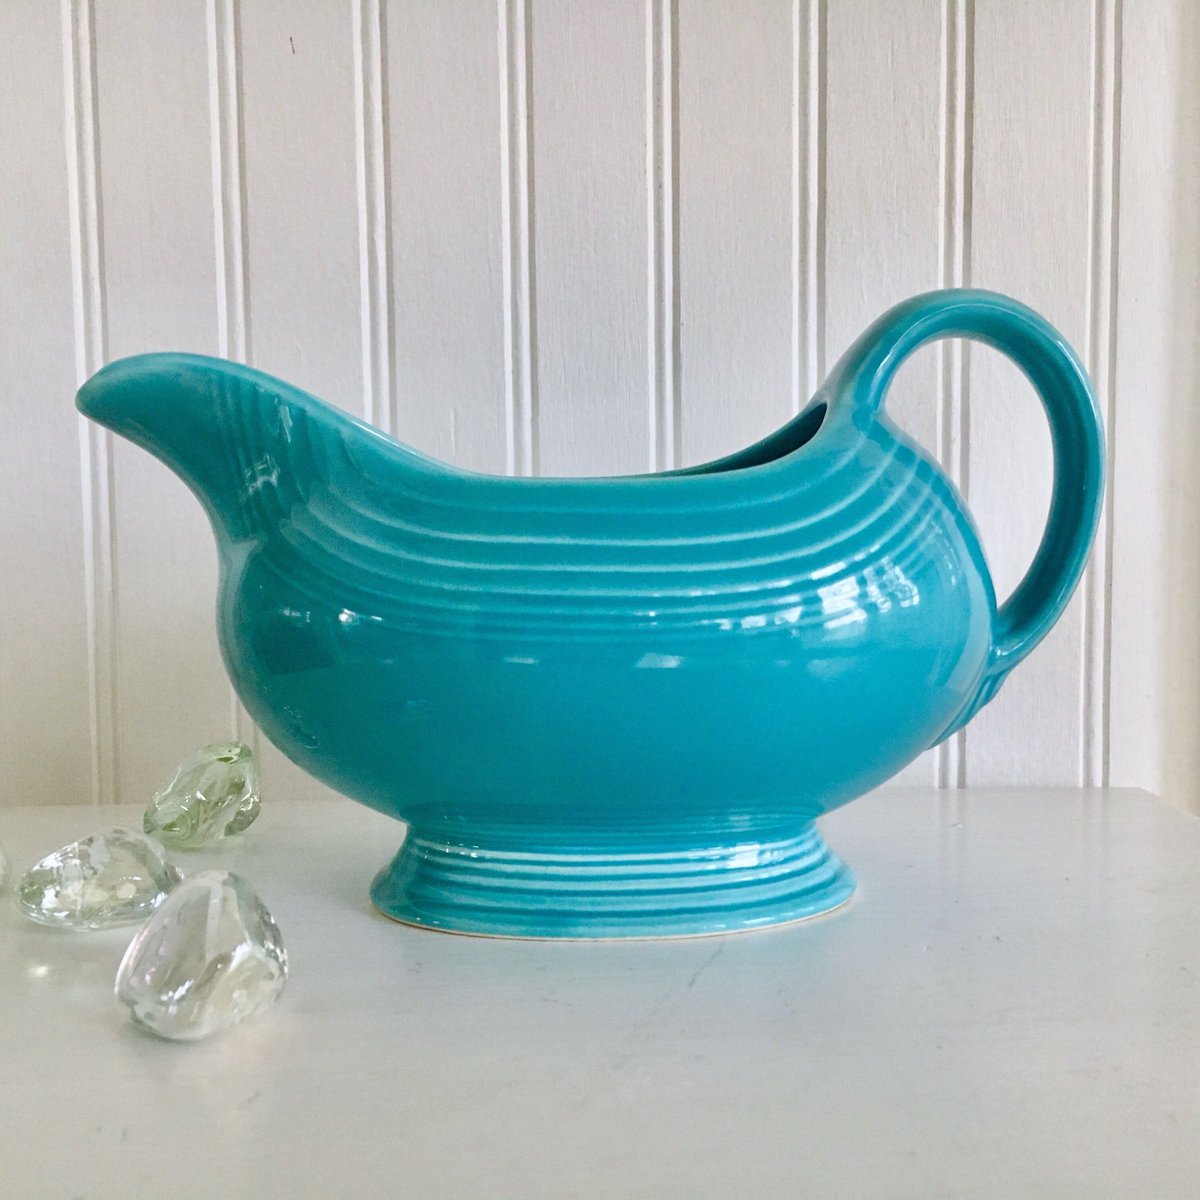 You can’t get more American than vintage Fiestaware! #fiestaware #vintagefiestaware etsy.me/2B1fE6W